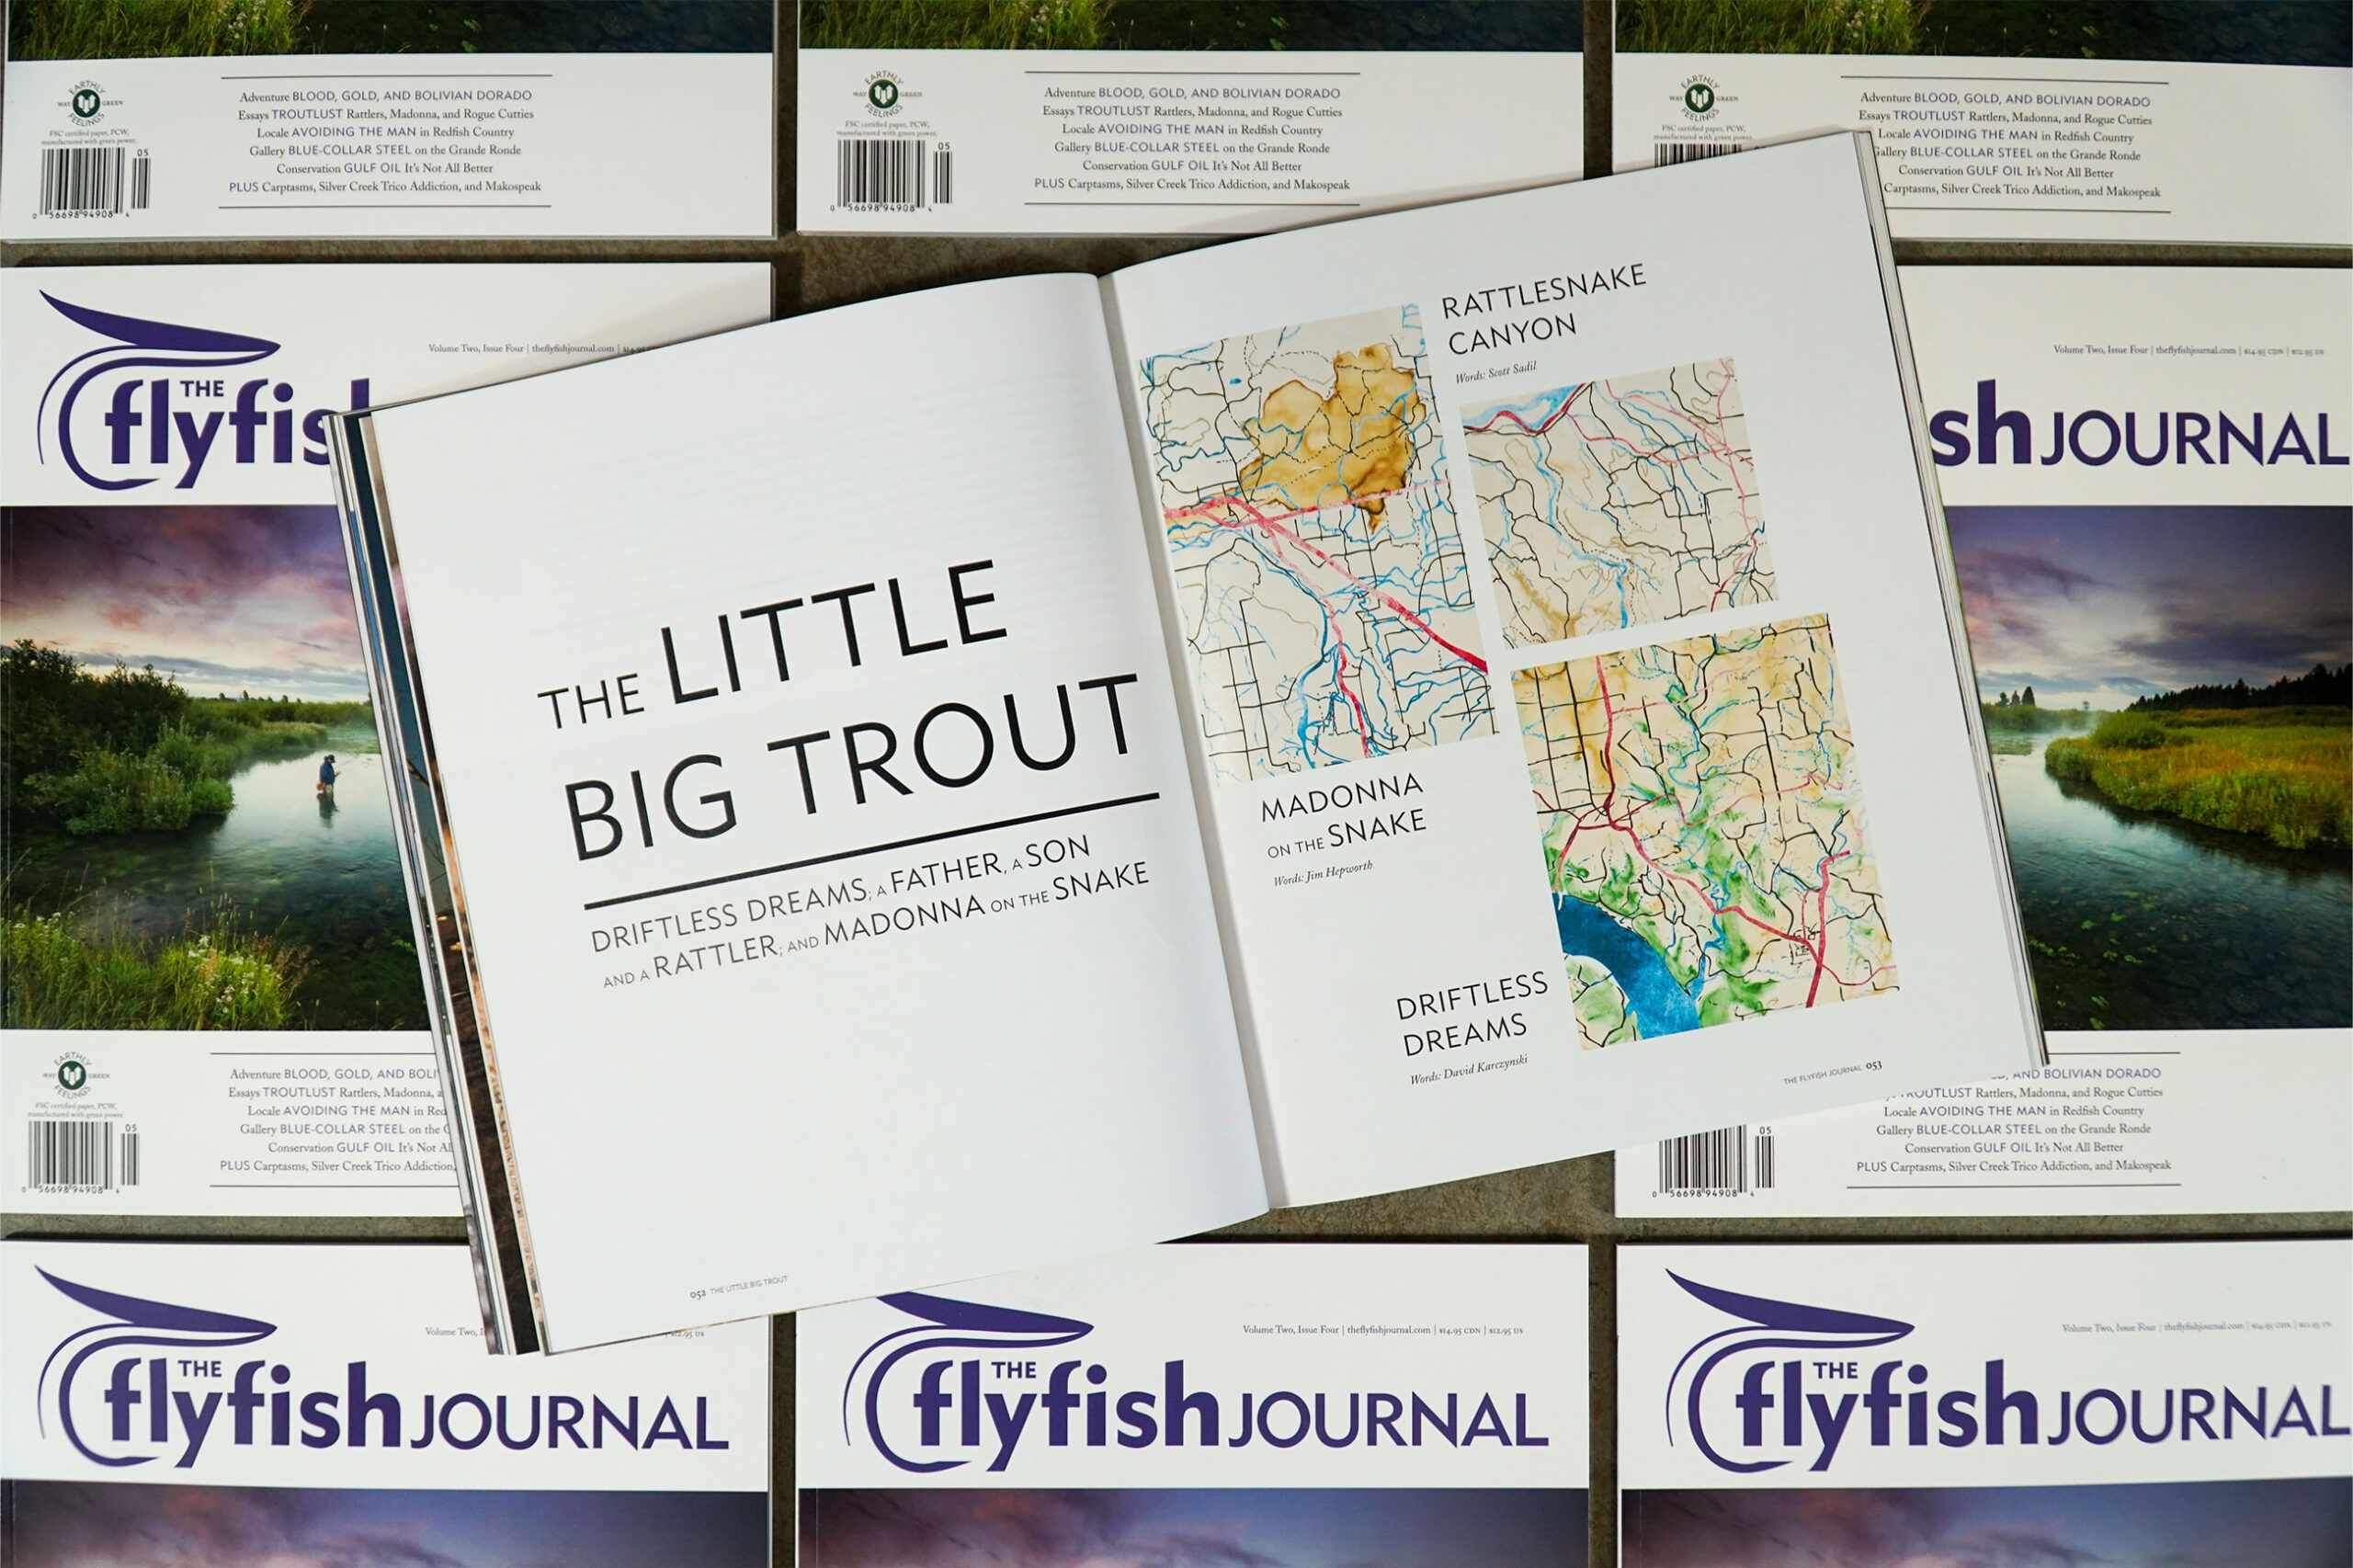 The Flyfish Journal Volume 2 Issue 4 Feature The Little Big Trout